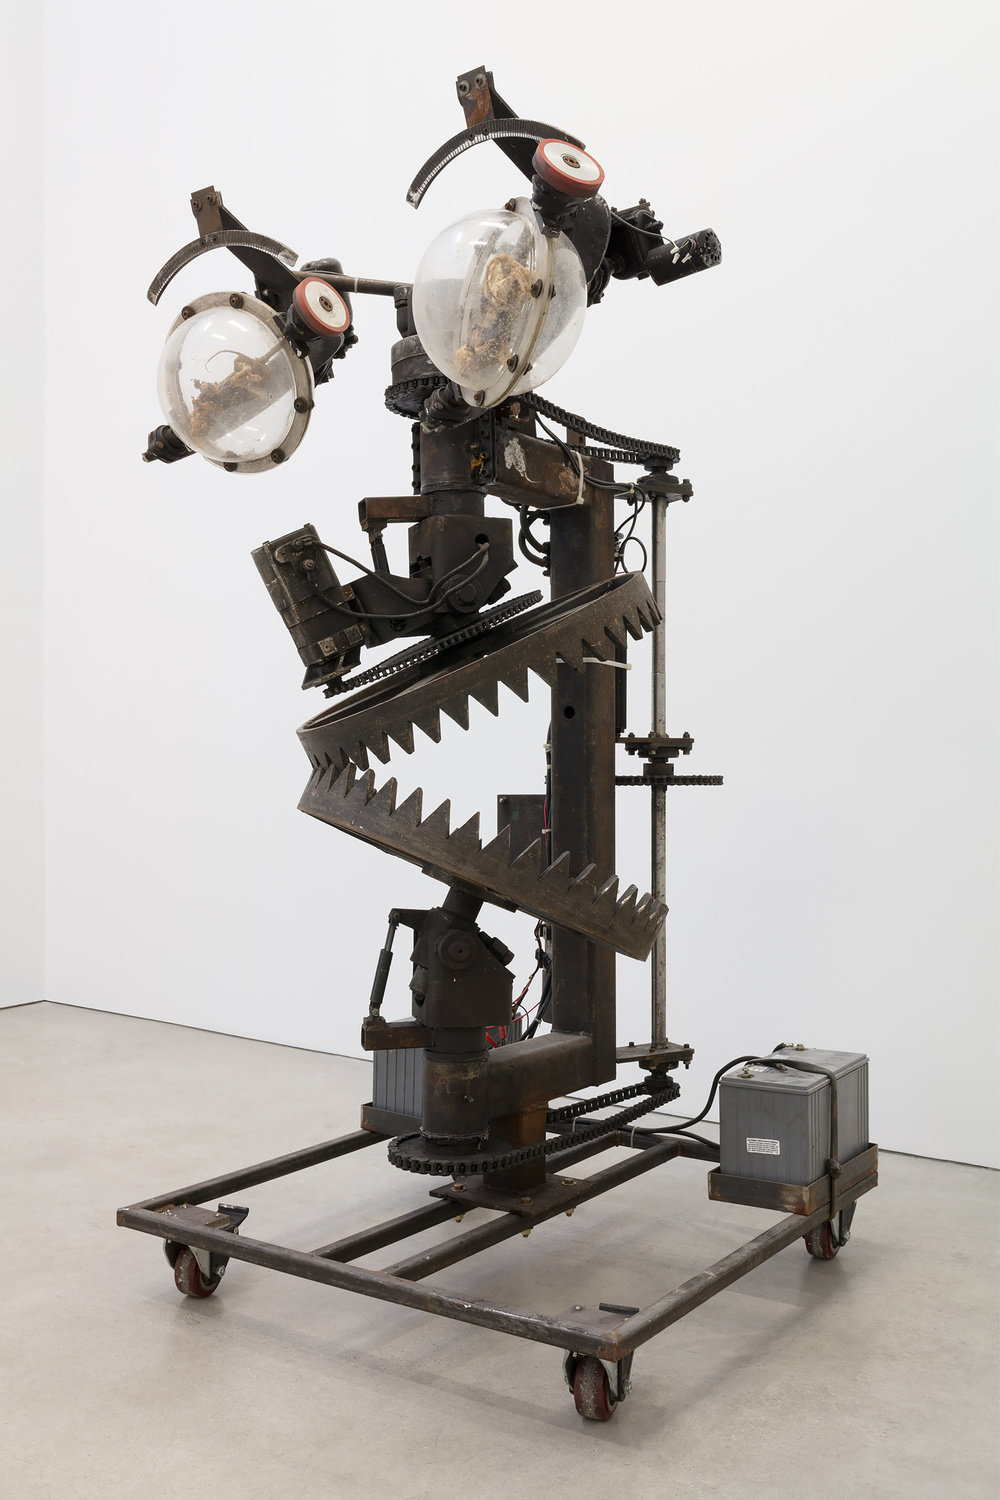 Srl, rotary jaws with squirrel eyes, 1987, steel, electronics, plexi glass, squirrels, 80 x 41 x 40 in., 203.2 x 104.1 x 101.6 cm, cnon 59.729 pierre le hors